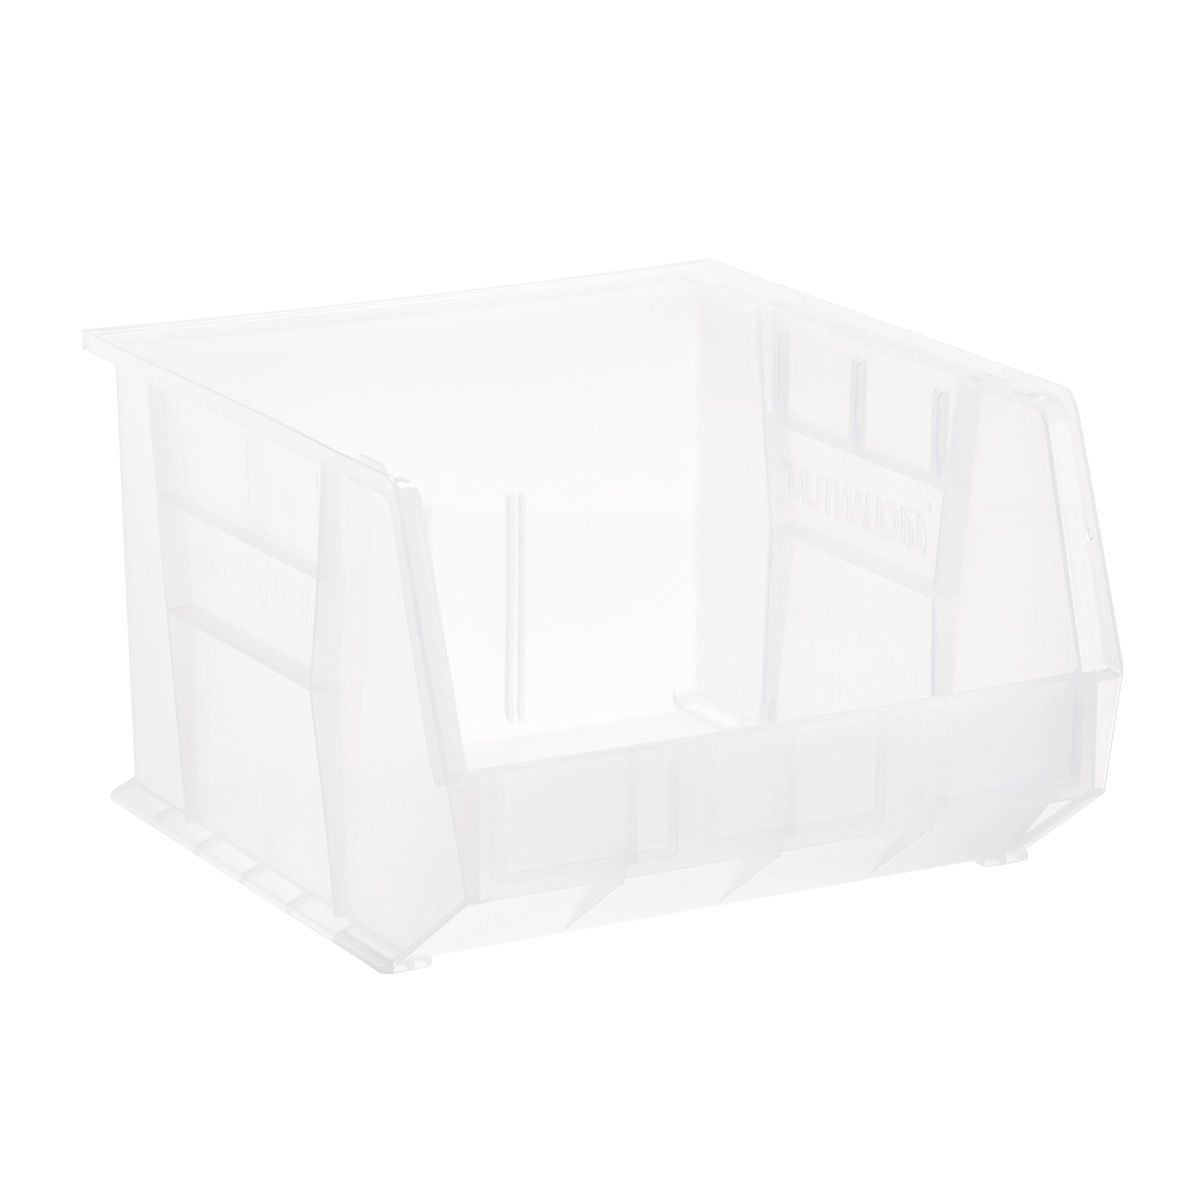 https://www.containerstore.com/catalogimages/370890/10079269-large-stackable-utility-bin.jpg